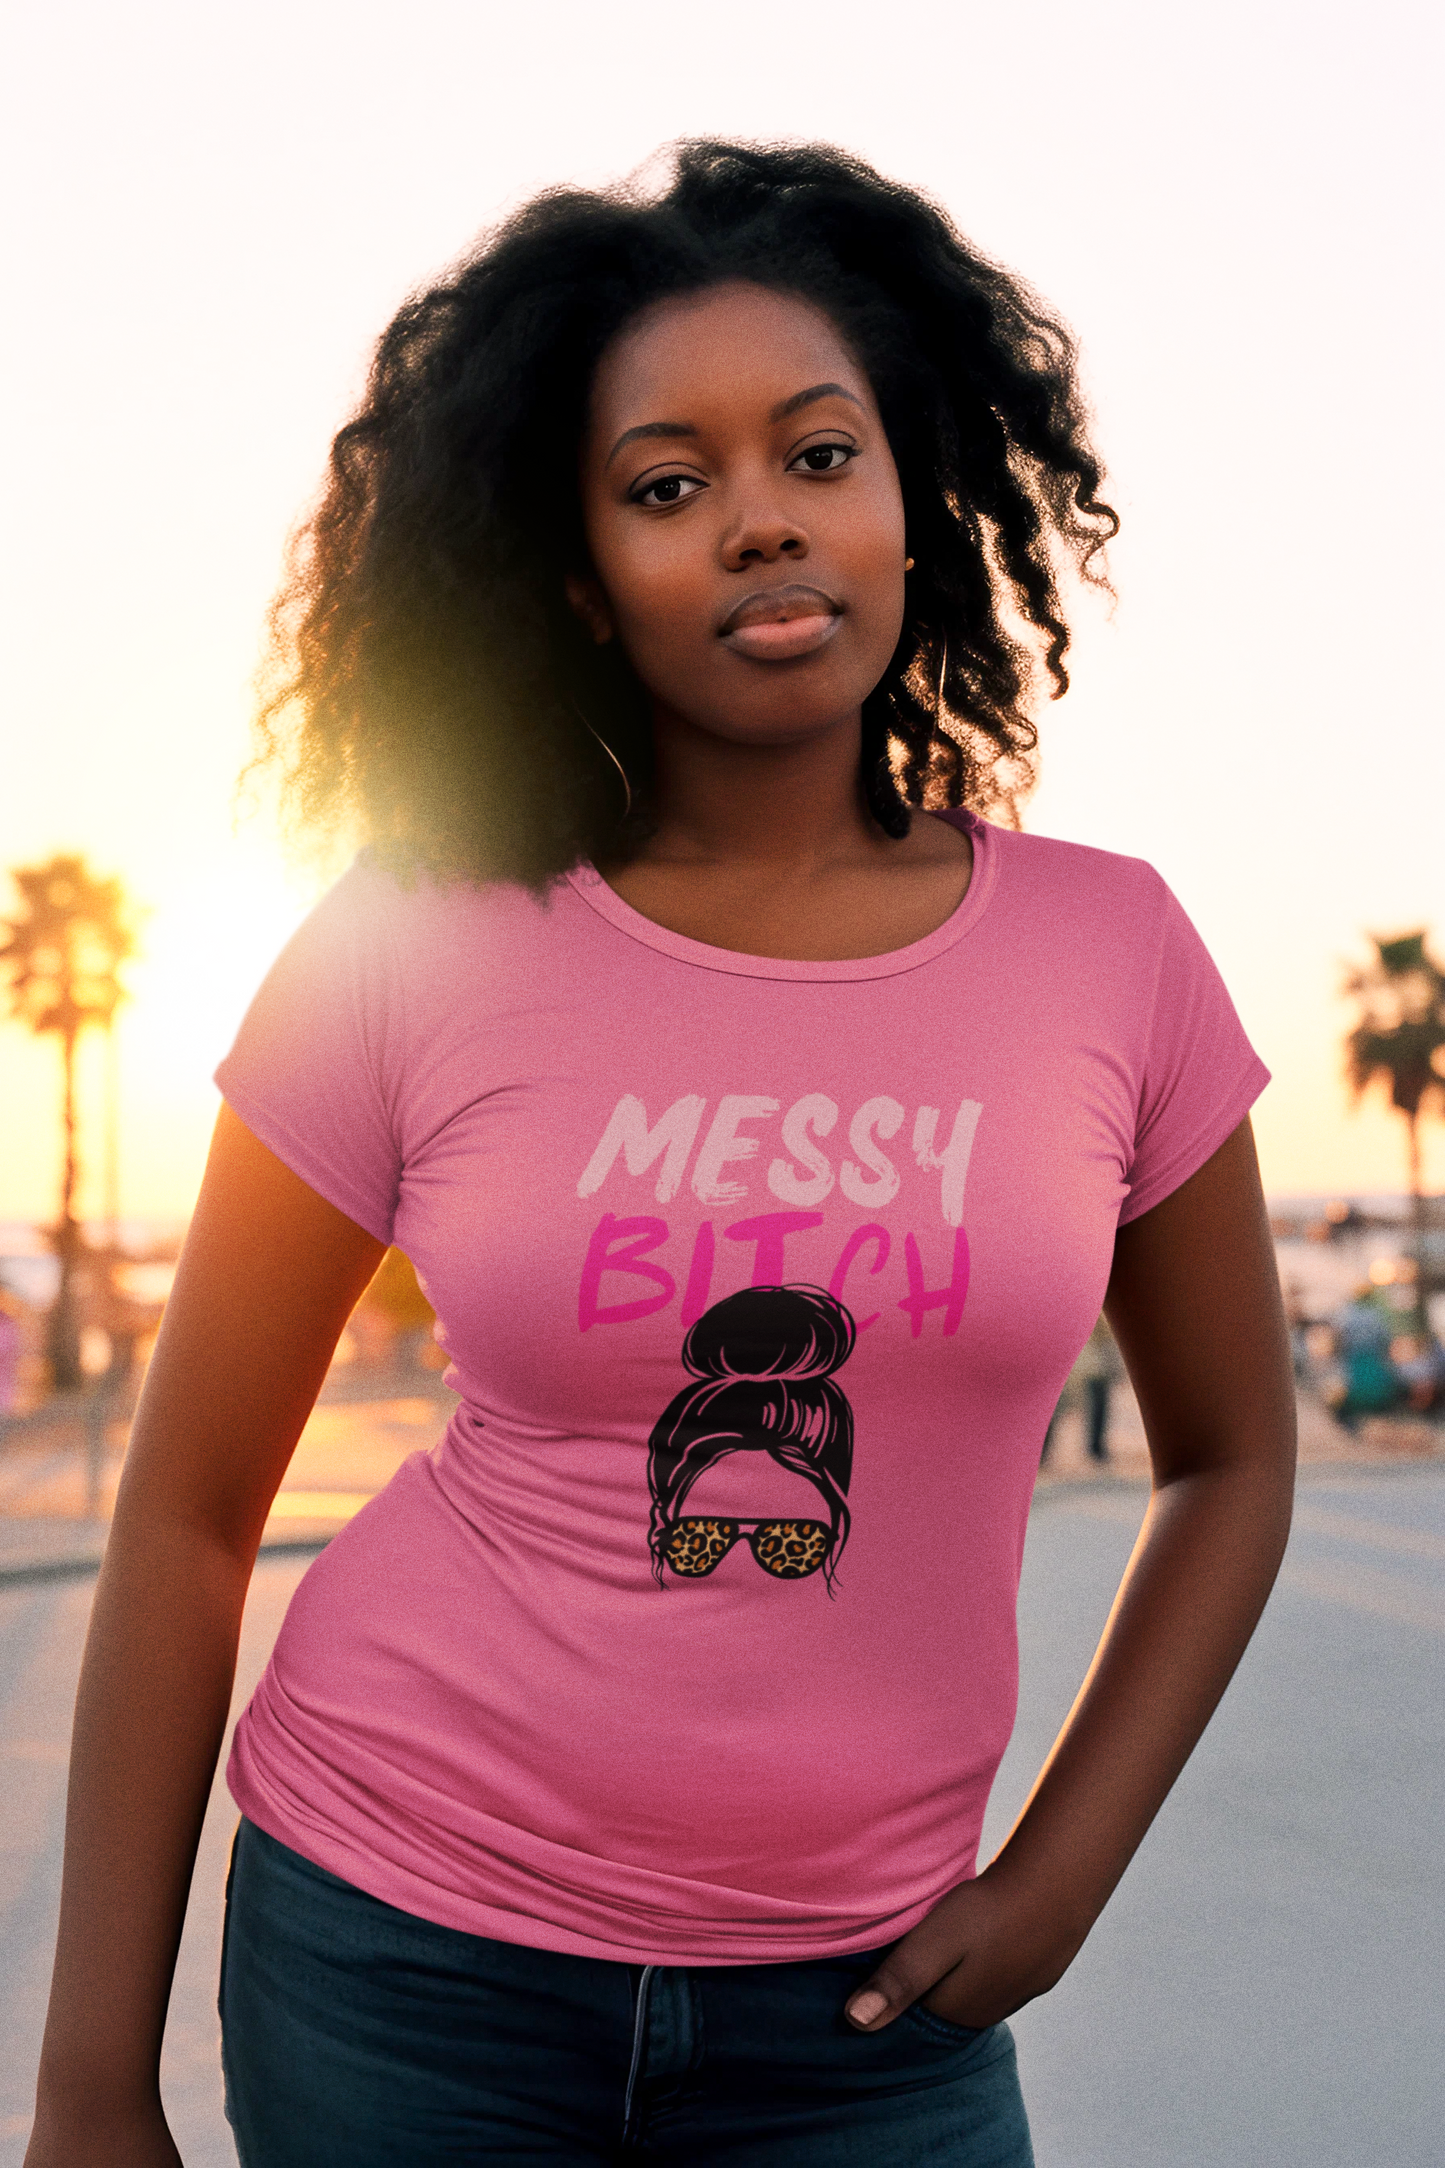 Messy Bitch Women's Midweight Cotton Tee